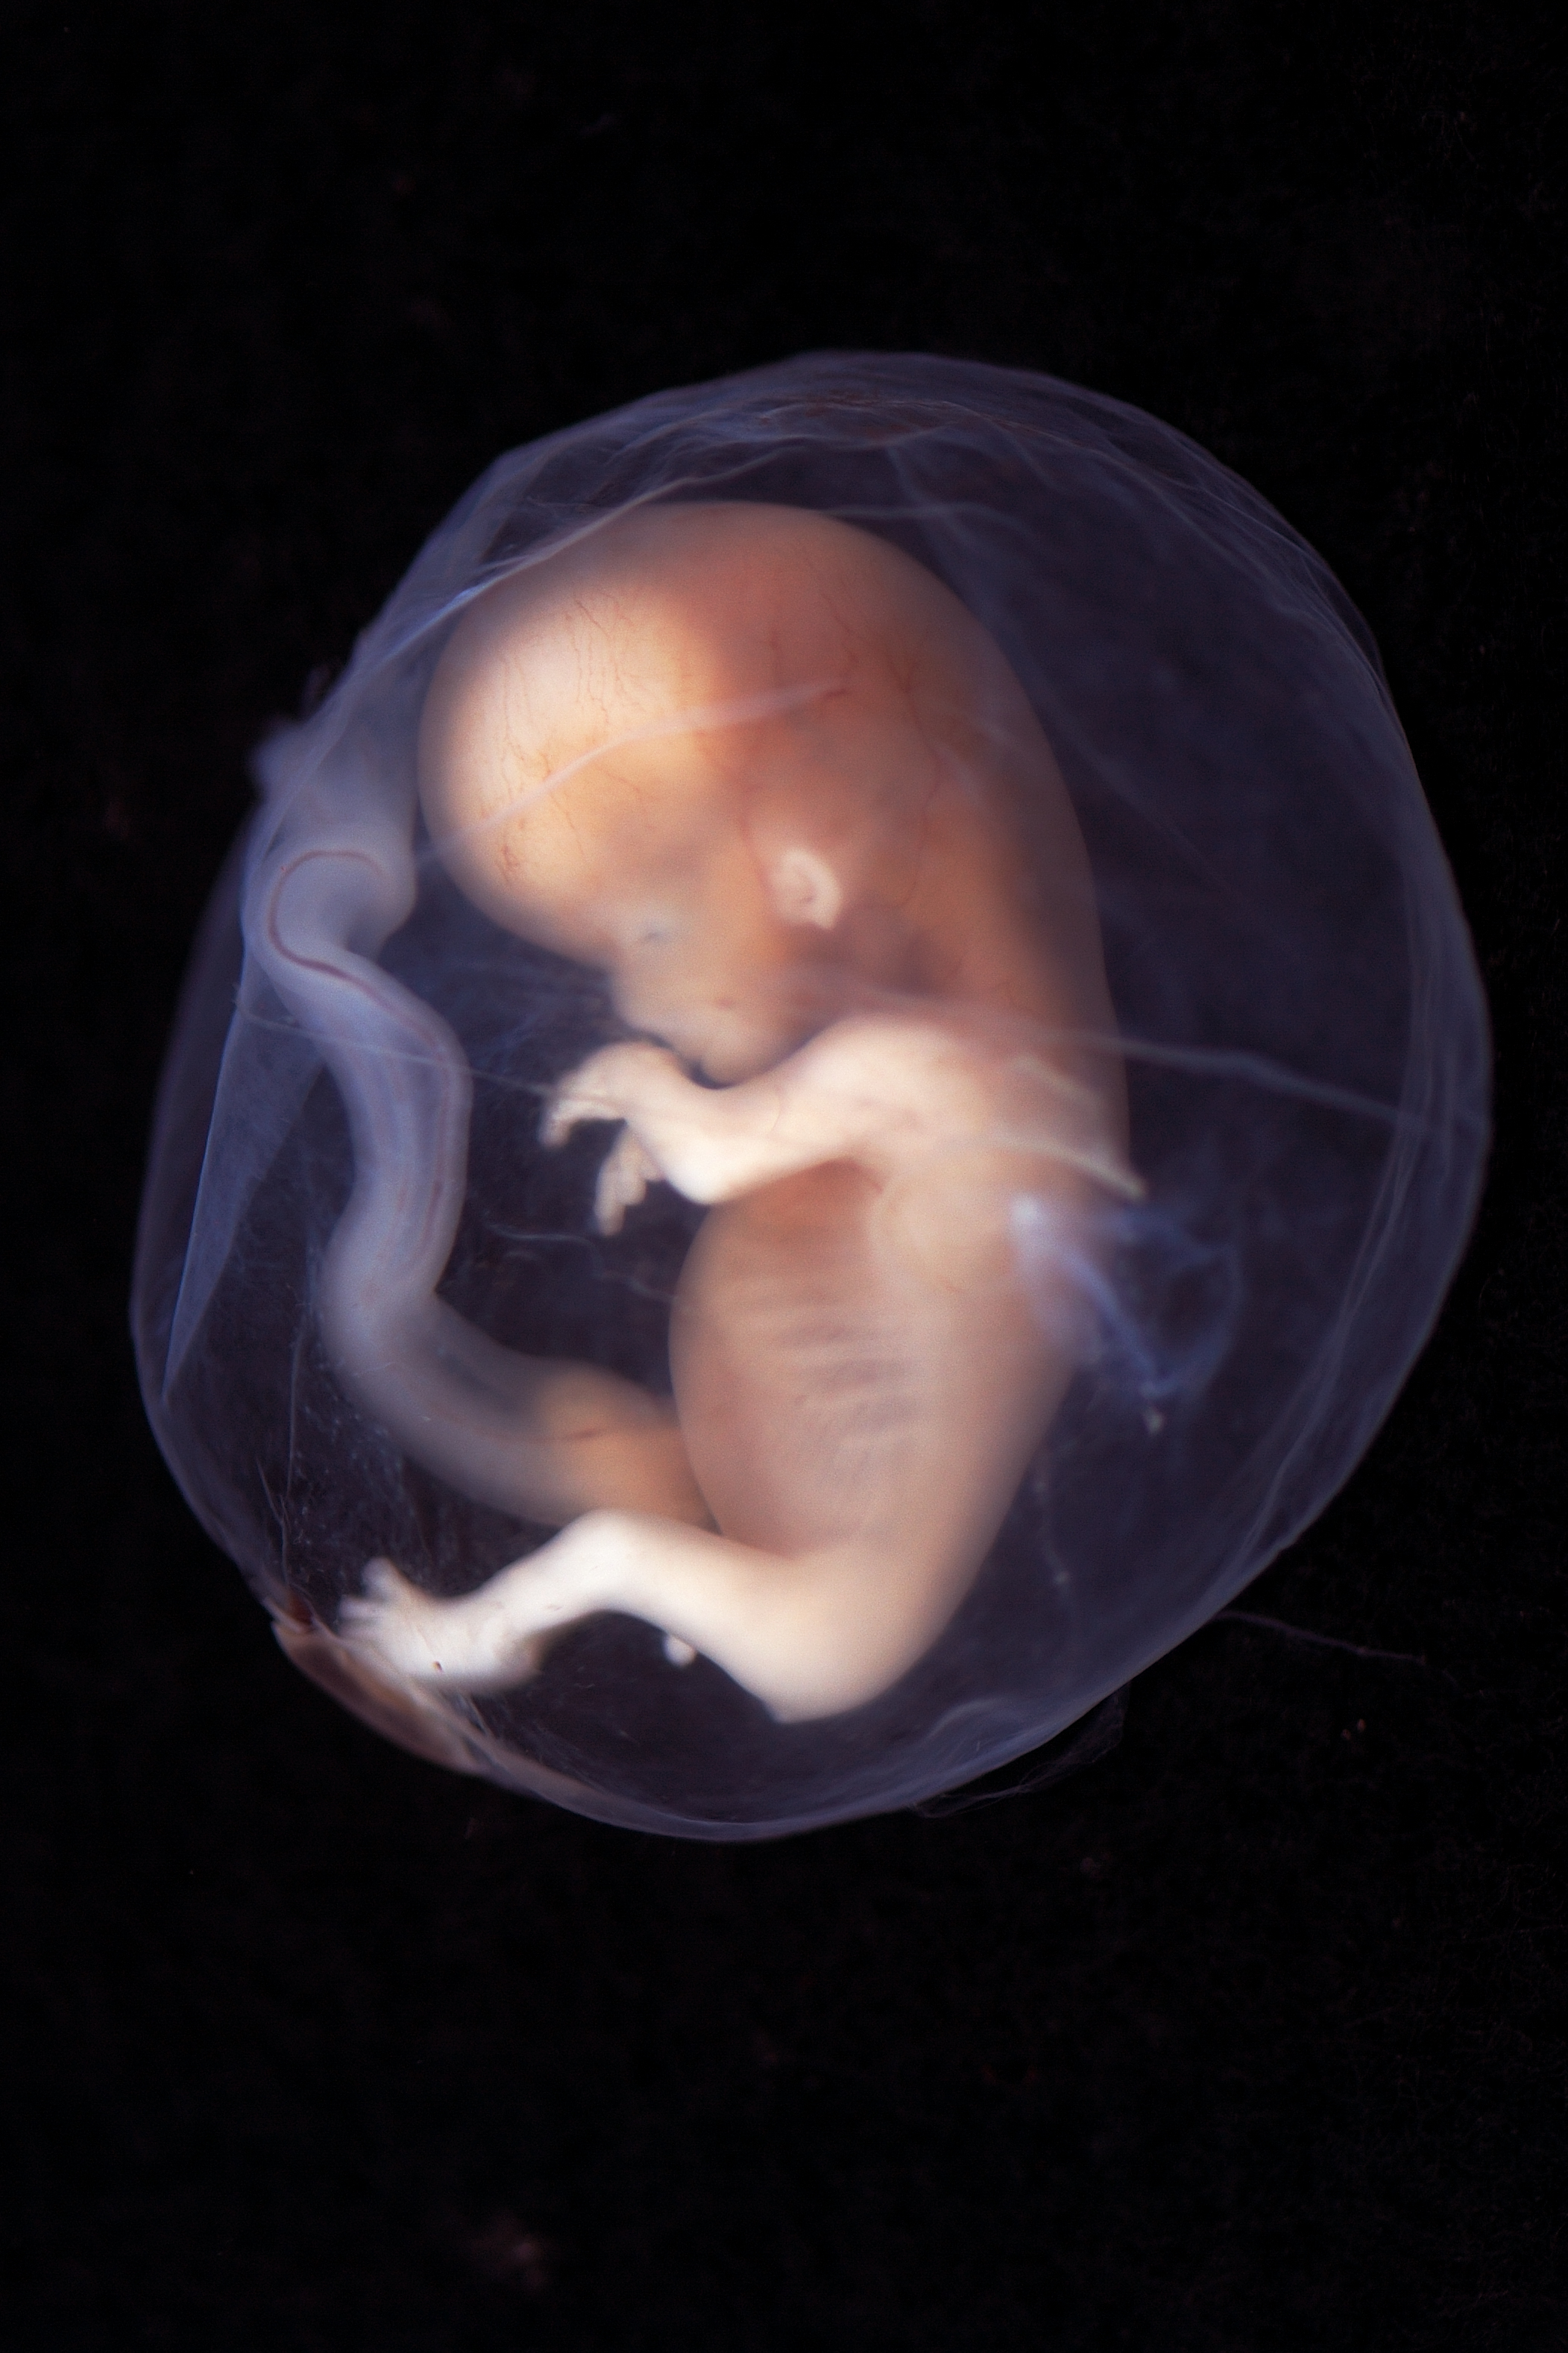 Incredible Real Photos of the Human Developing in the Womb